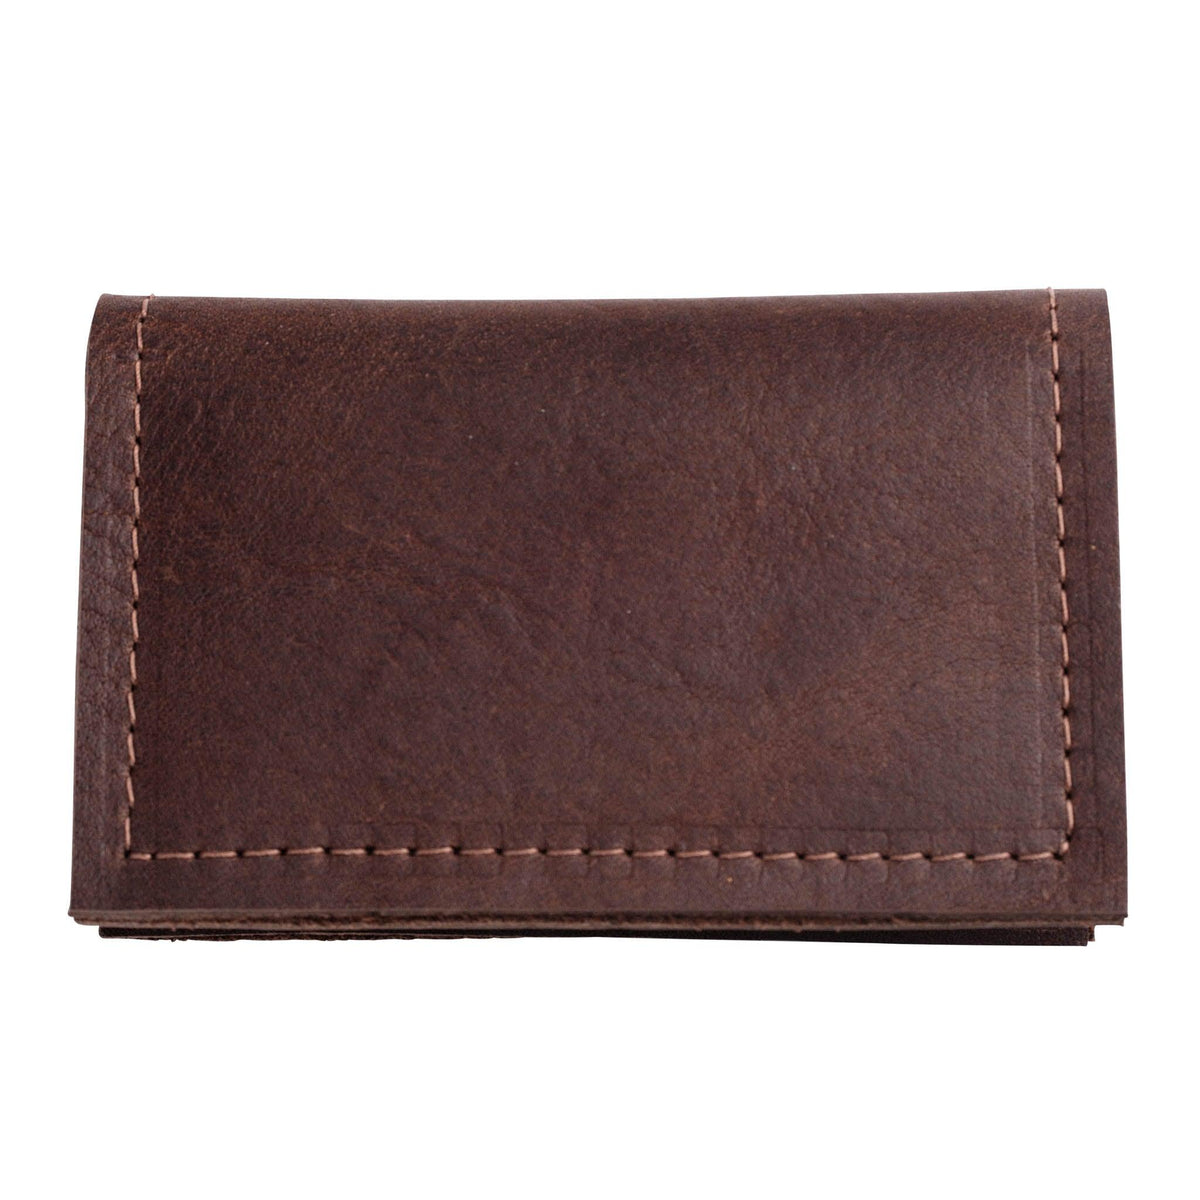 Slim Fold Card Carrier in Chocolate Brown - GLORY HAUS 